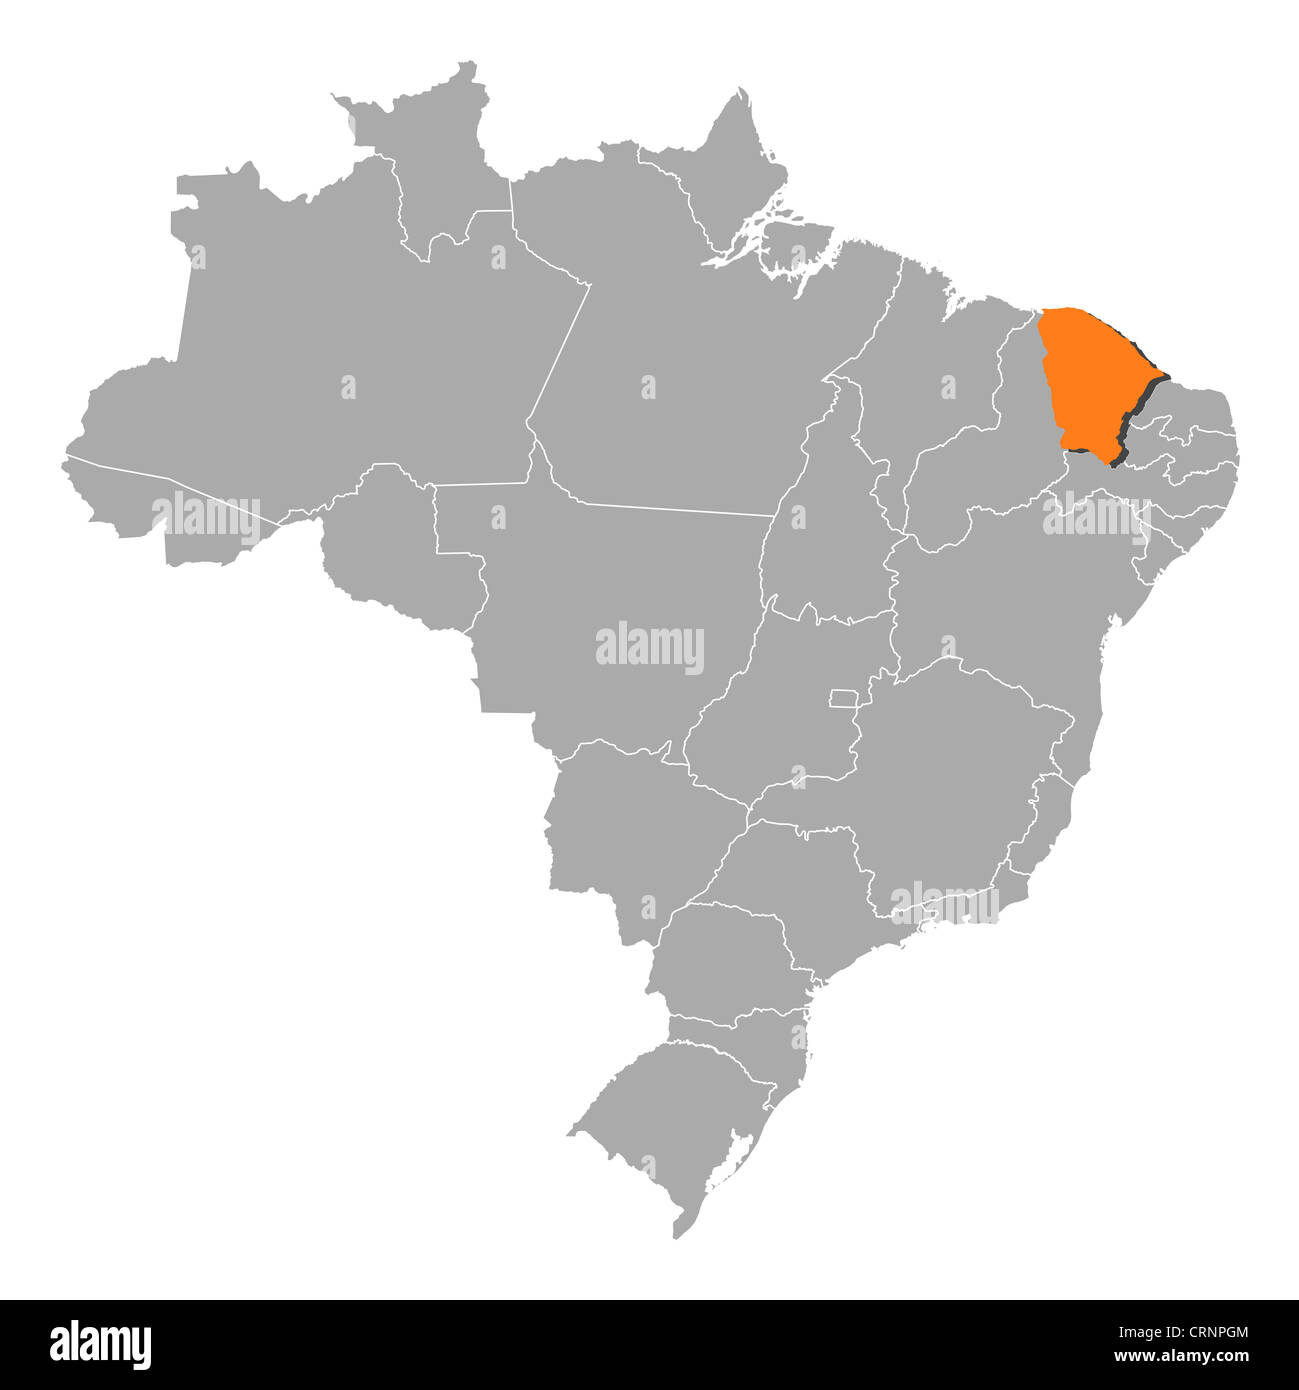 Political map of Brazil with the several states where Ceará is highlighted. Stock Photo